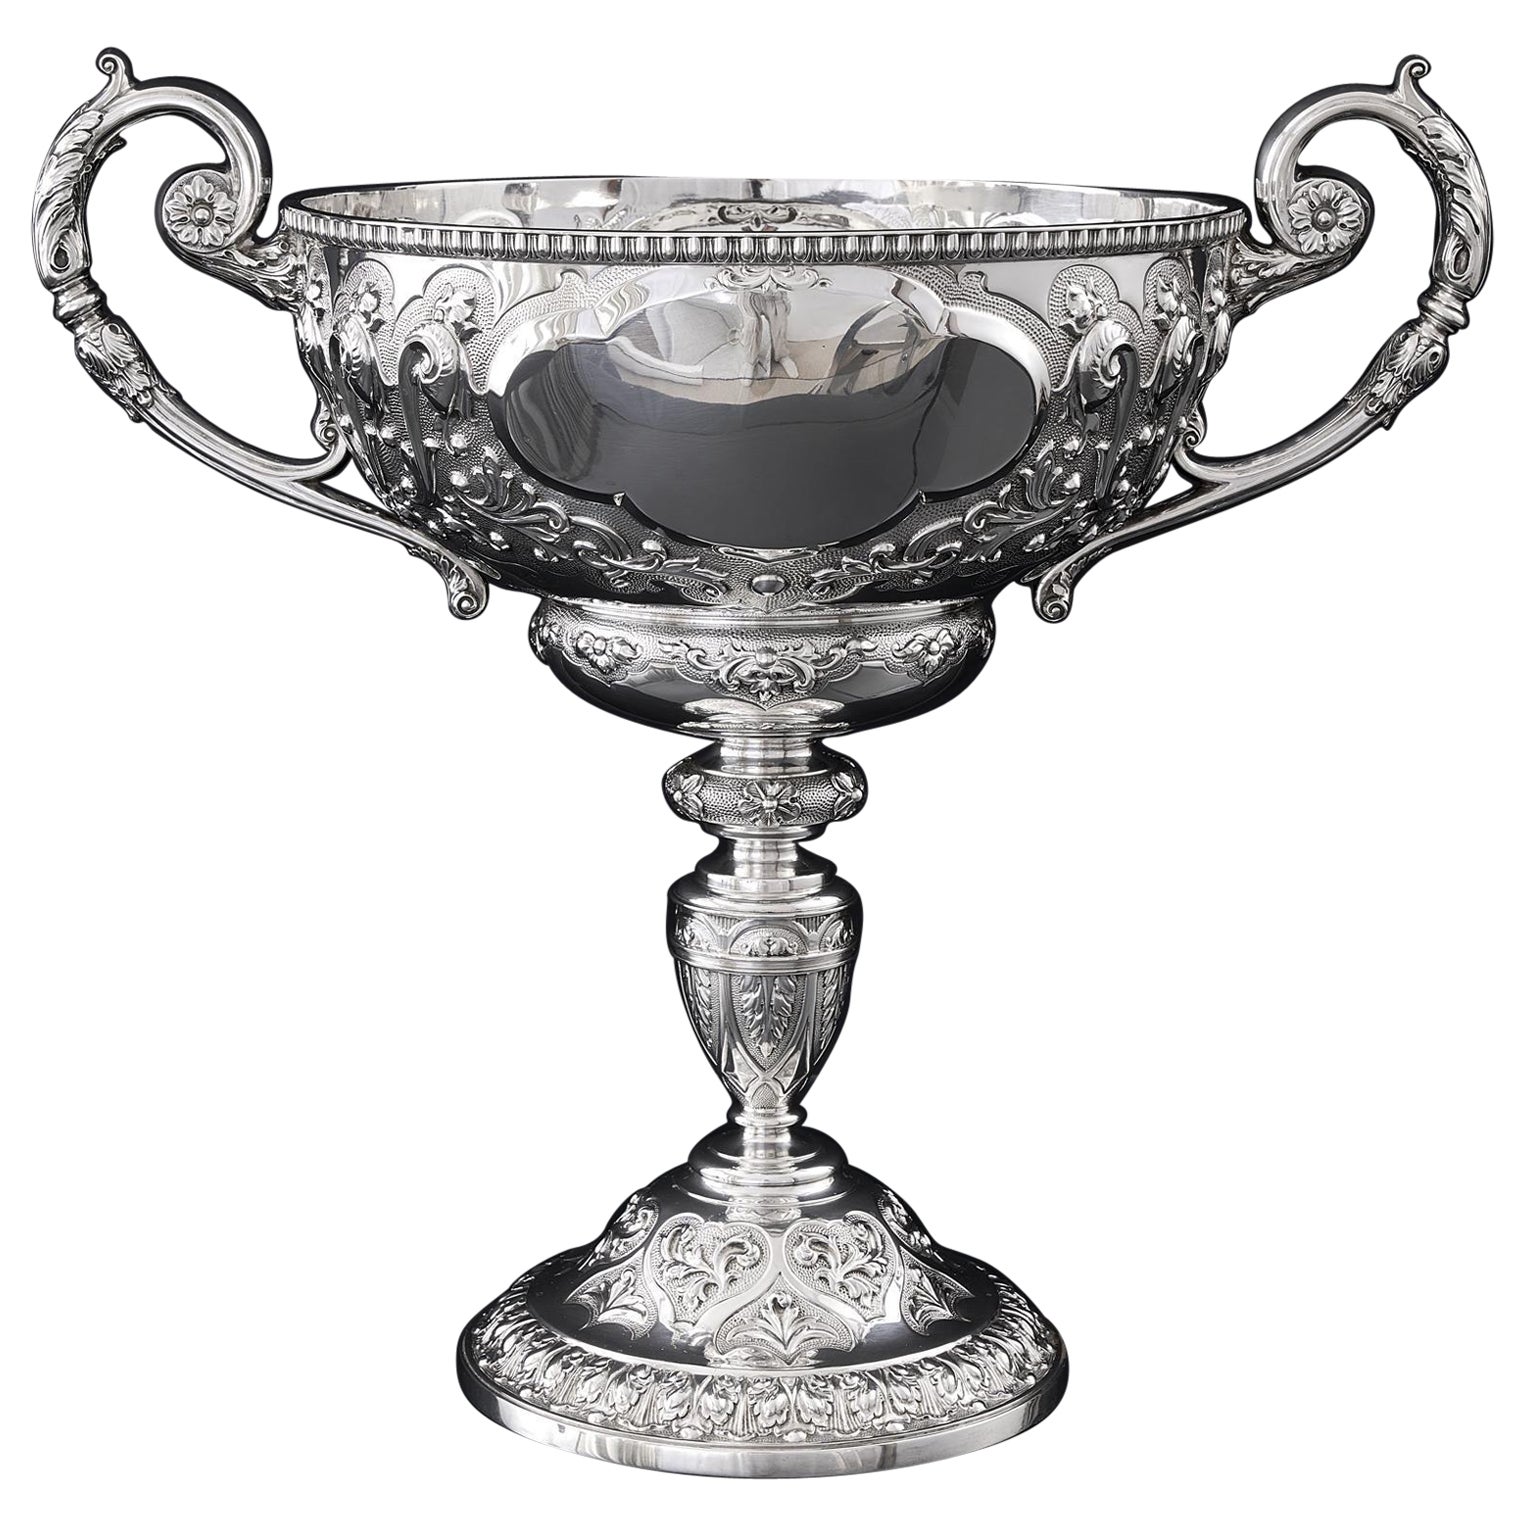 Two-handled antique sterling silver trophy comport